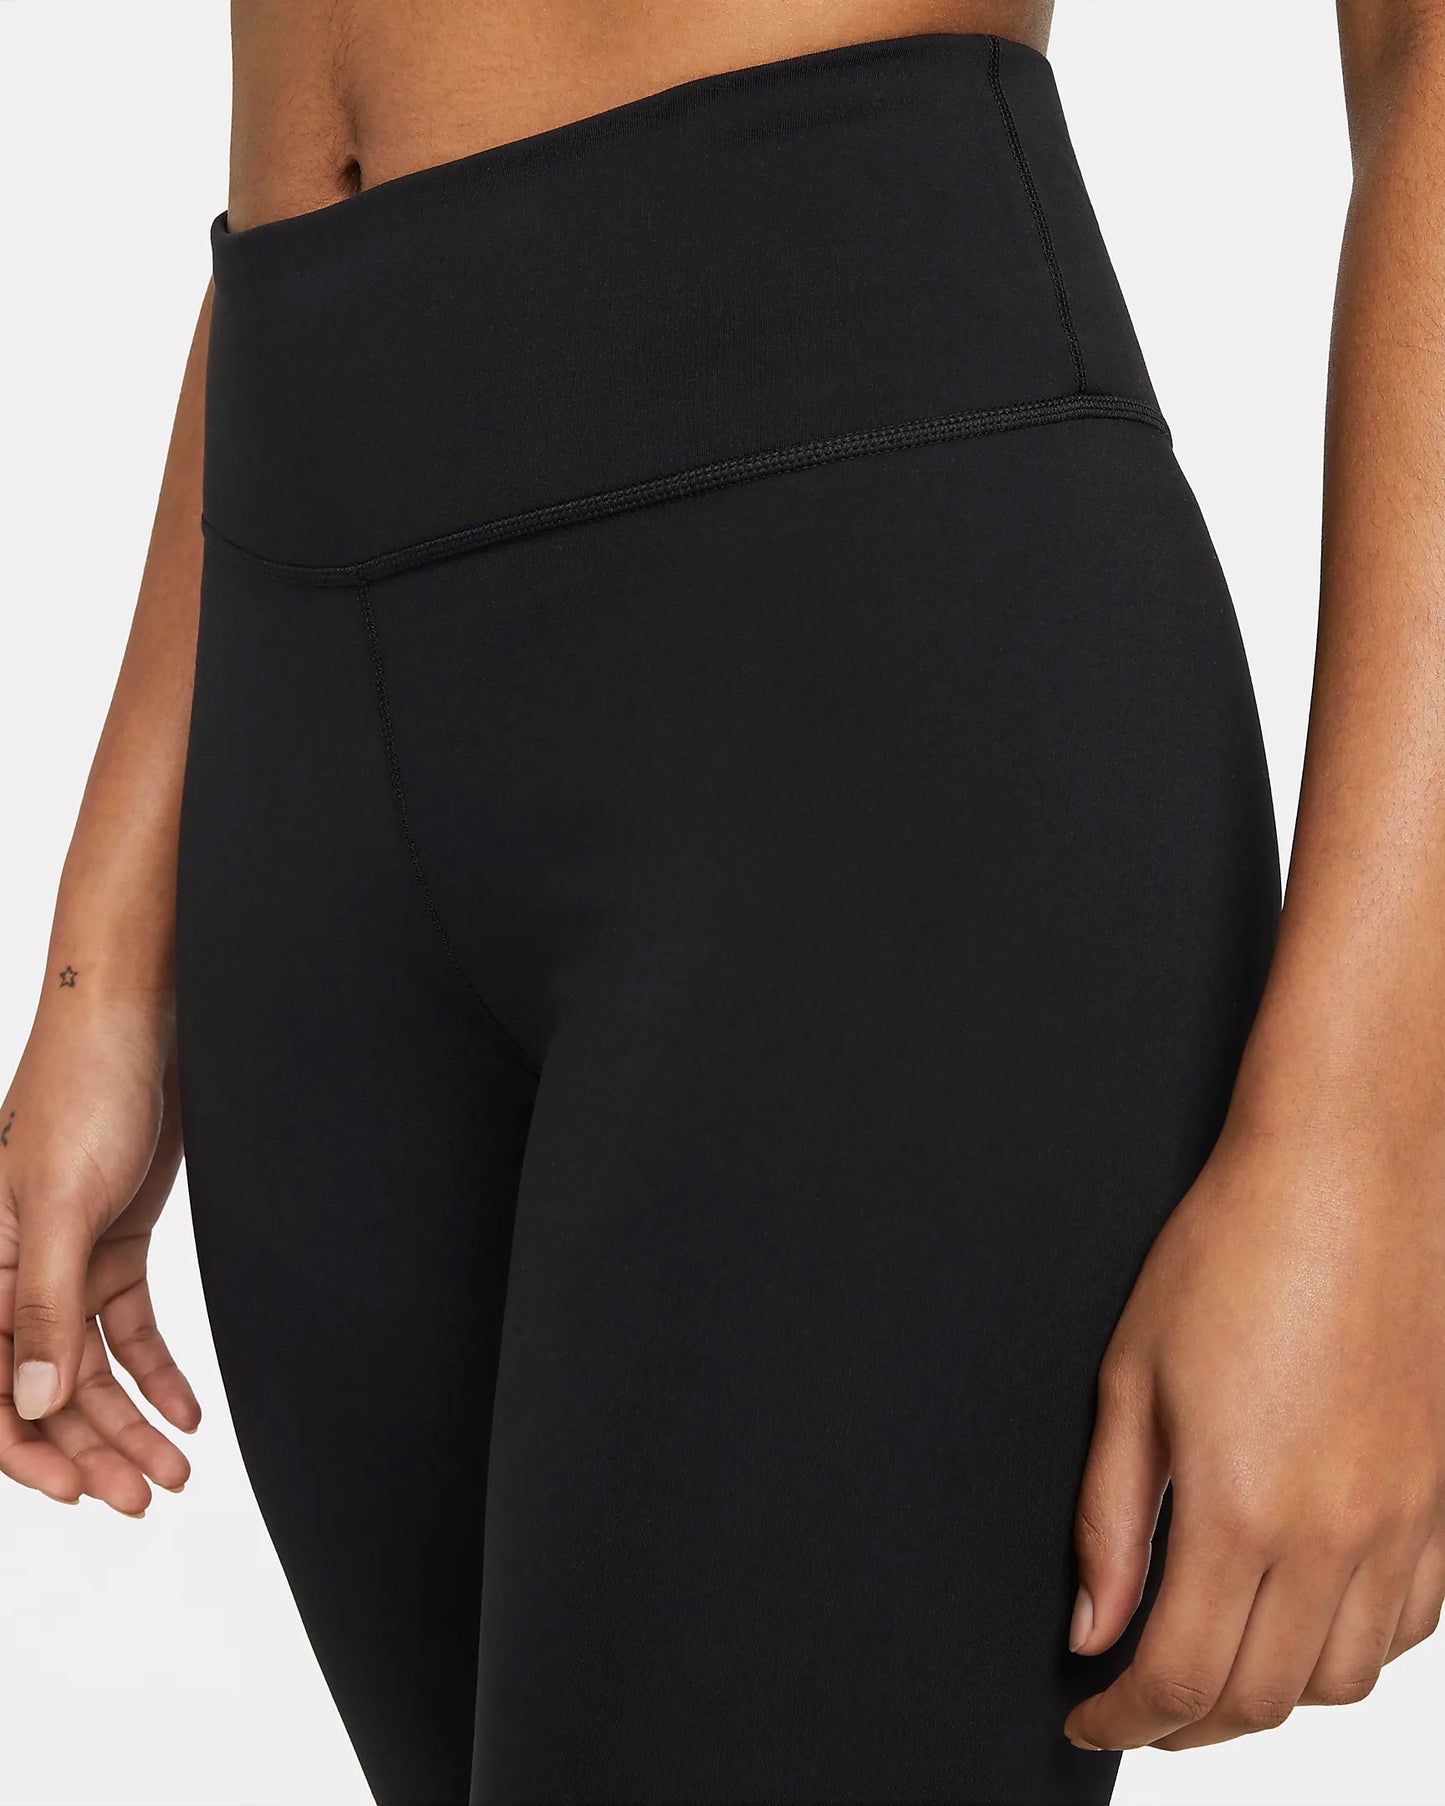 Nike Womens ONE Luxe Tight Crop Womens